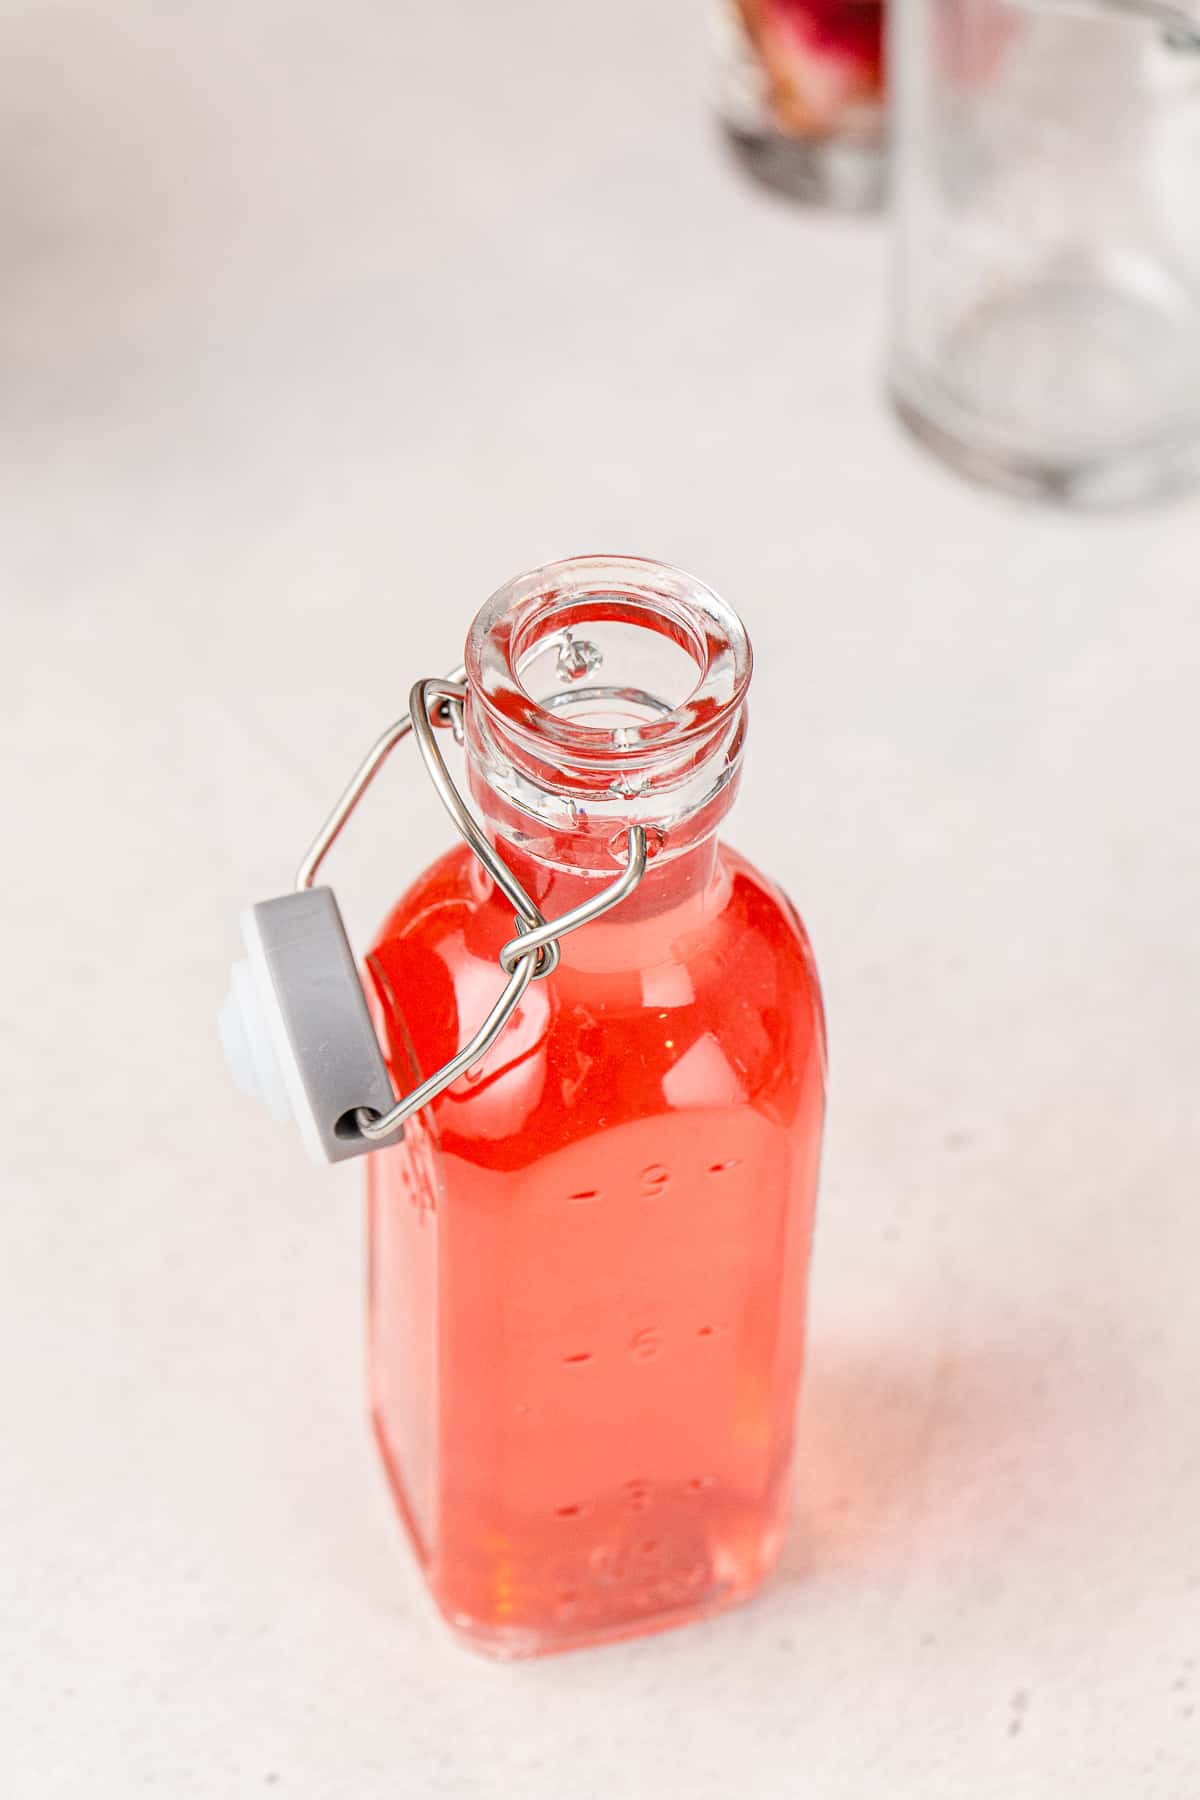 Glass swing-top bottle filled with pink rhubarb syrup, sitting open on a countertop.